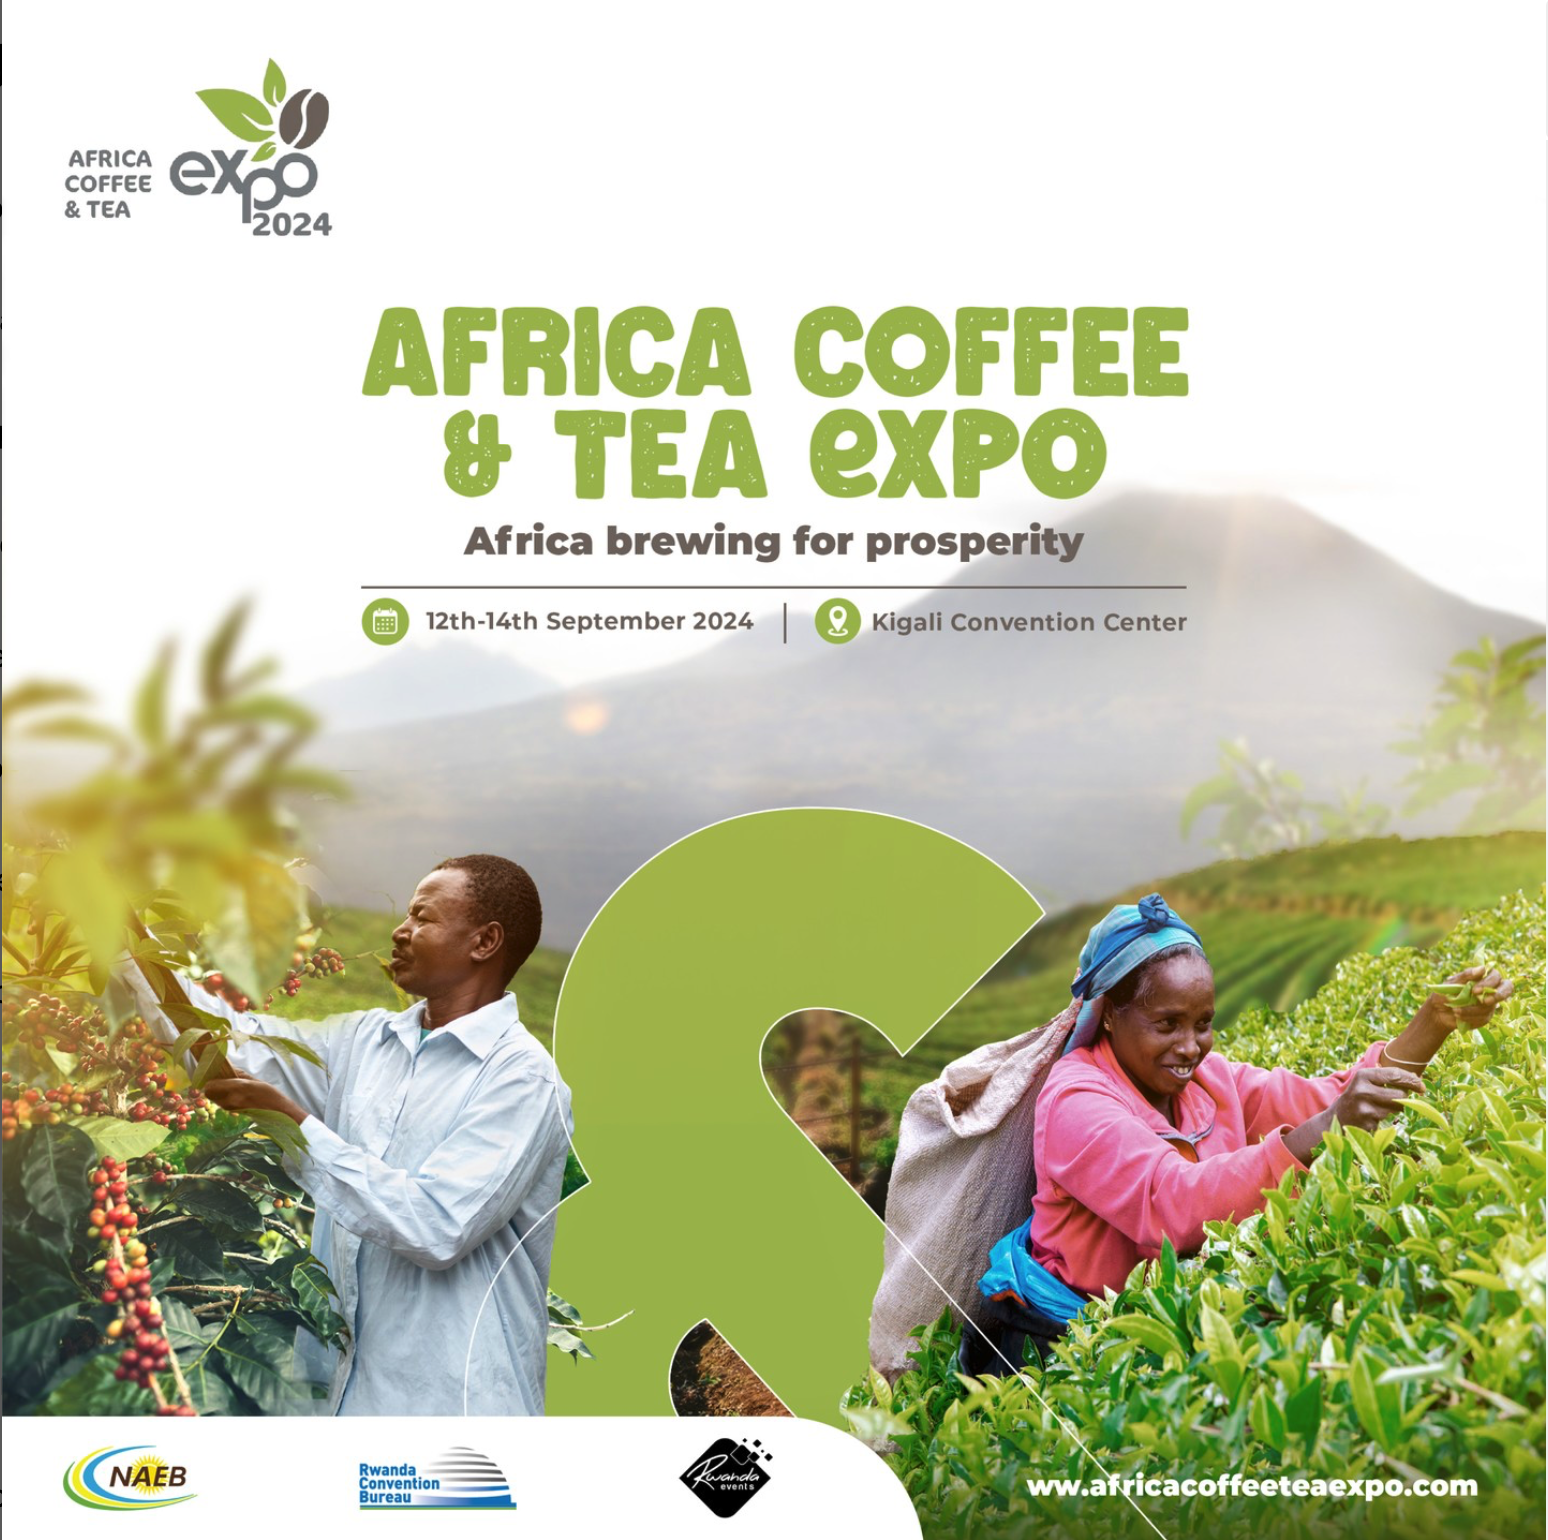 ACTEXPO24: Discover Best Coffee and Tea at Africa Coffee & Tea Expo 2024